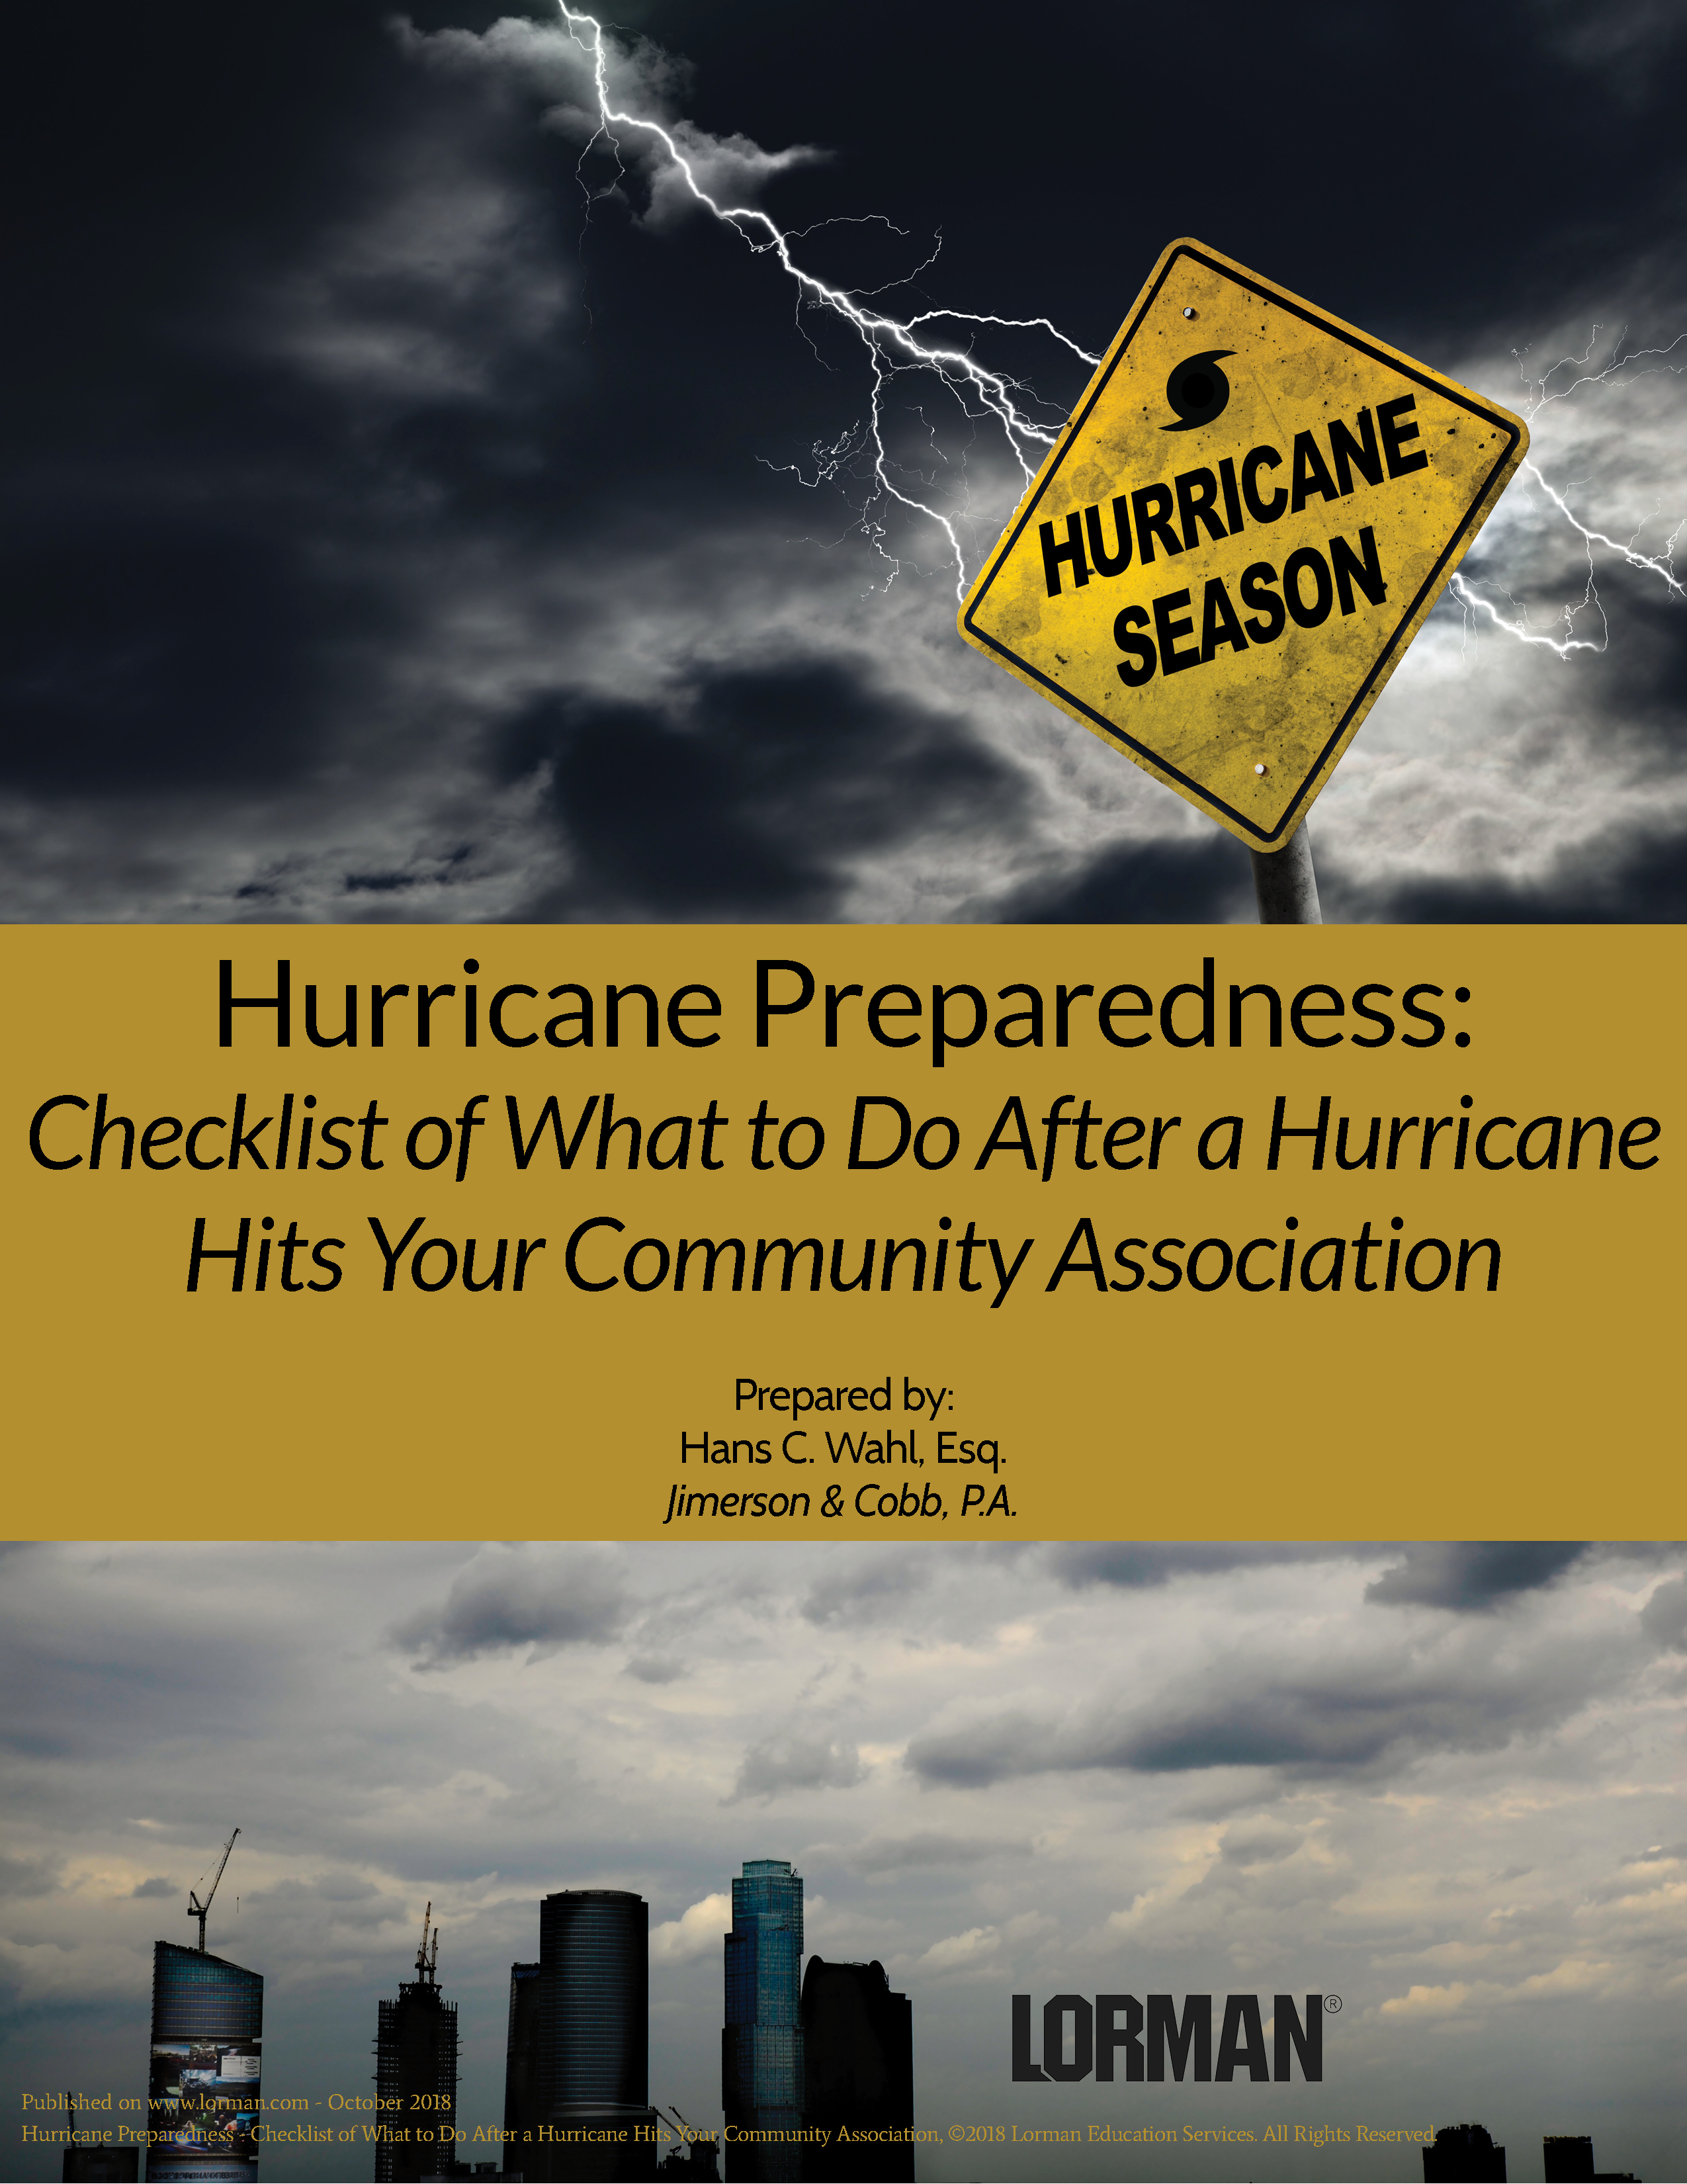 Hurricane Preparedness: Checklist of What to Do After a Hurricane Hits Your Community Association